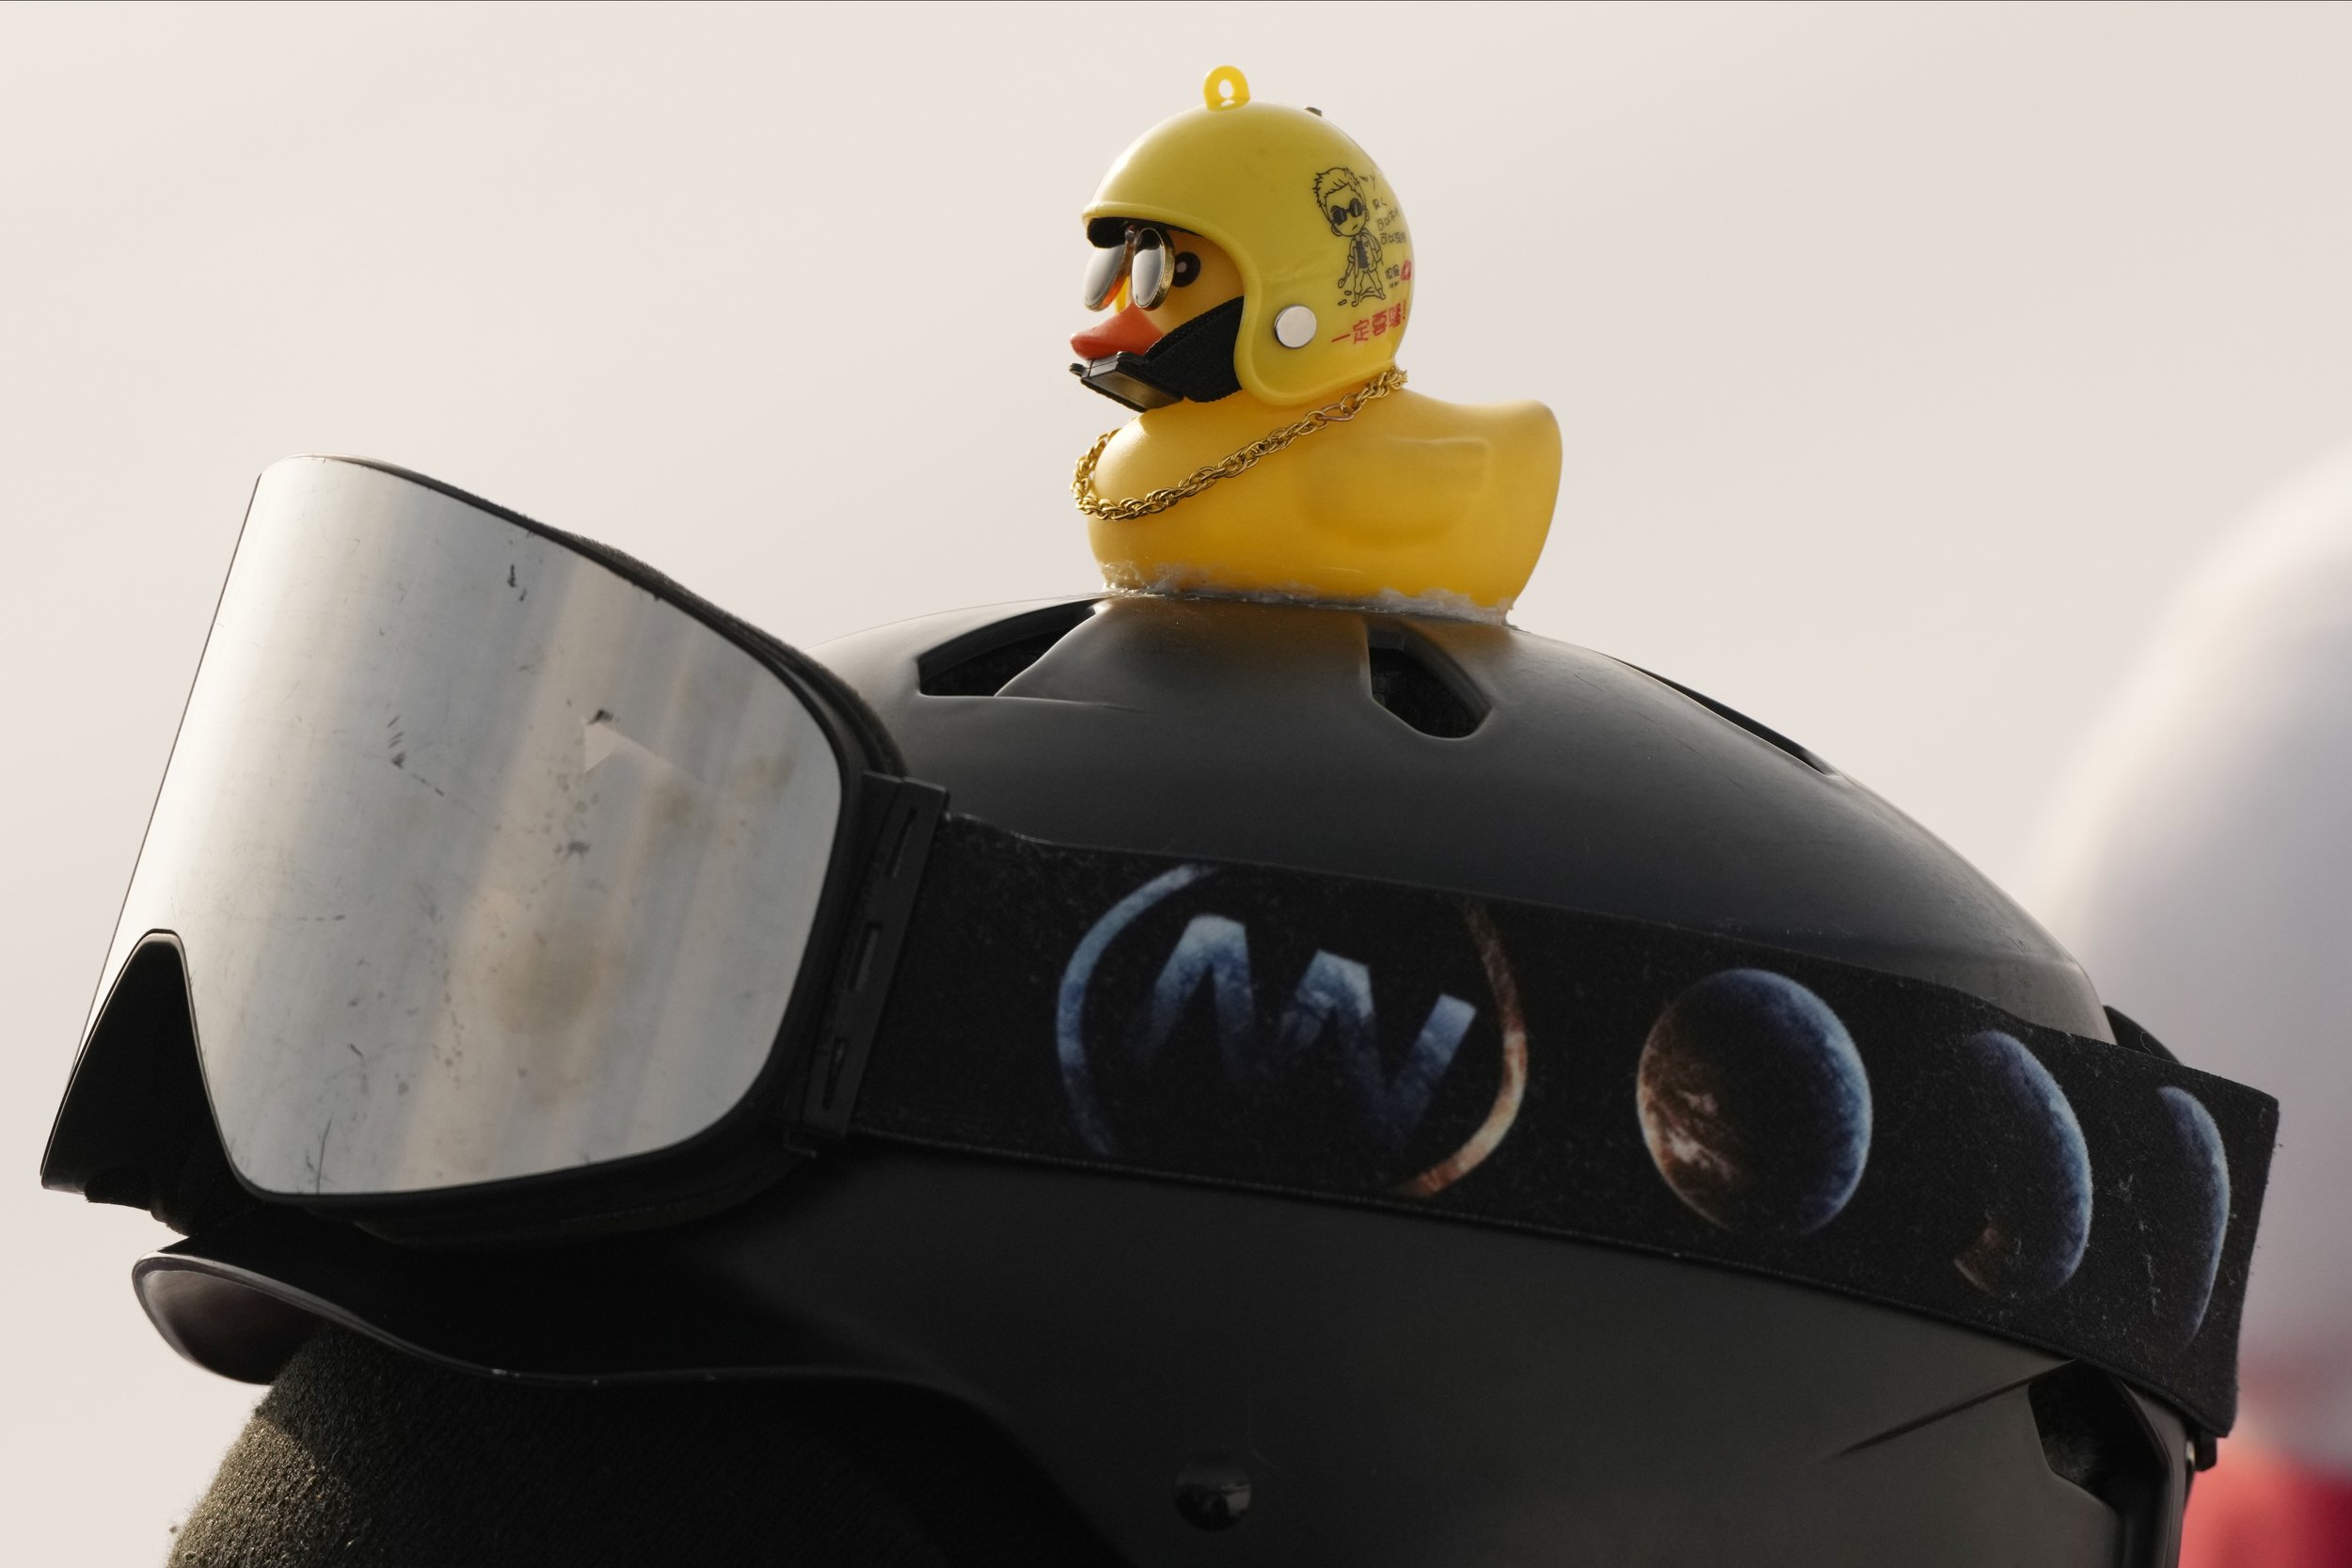  A volunteer fashions a rubber duck on the top of his helmet during the women's halfpipe finals at the 2022 Winter Olympics, Thursday, Feb. 10, 2022, in Zhangjiakou, China. (AP Photo/Francisco Seco) 